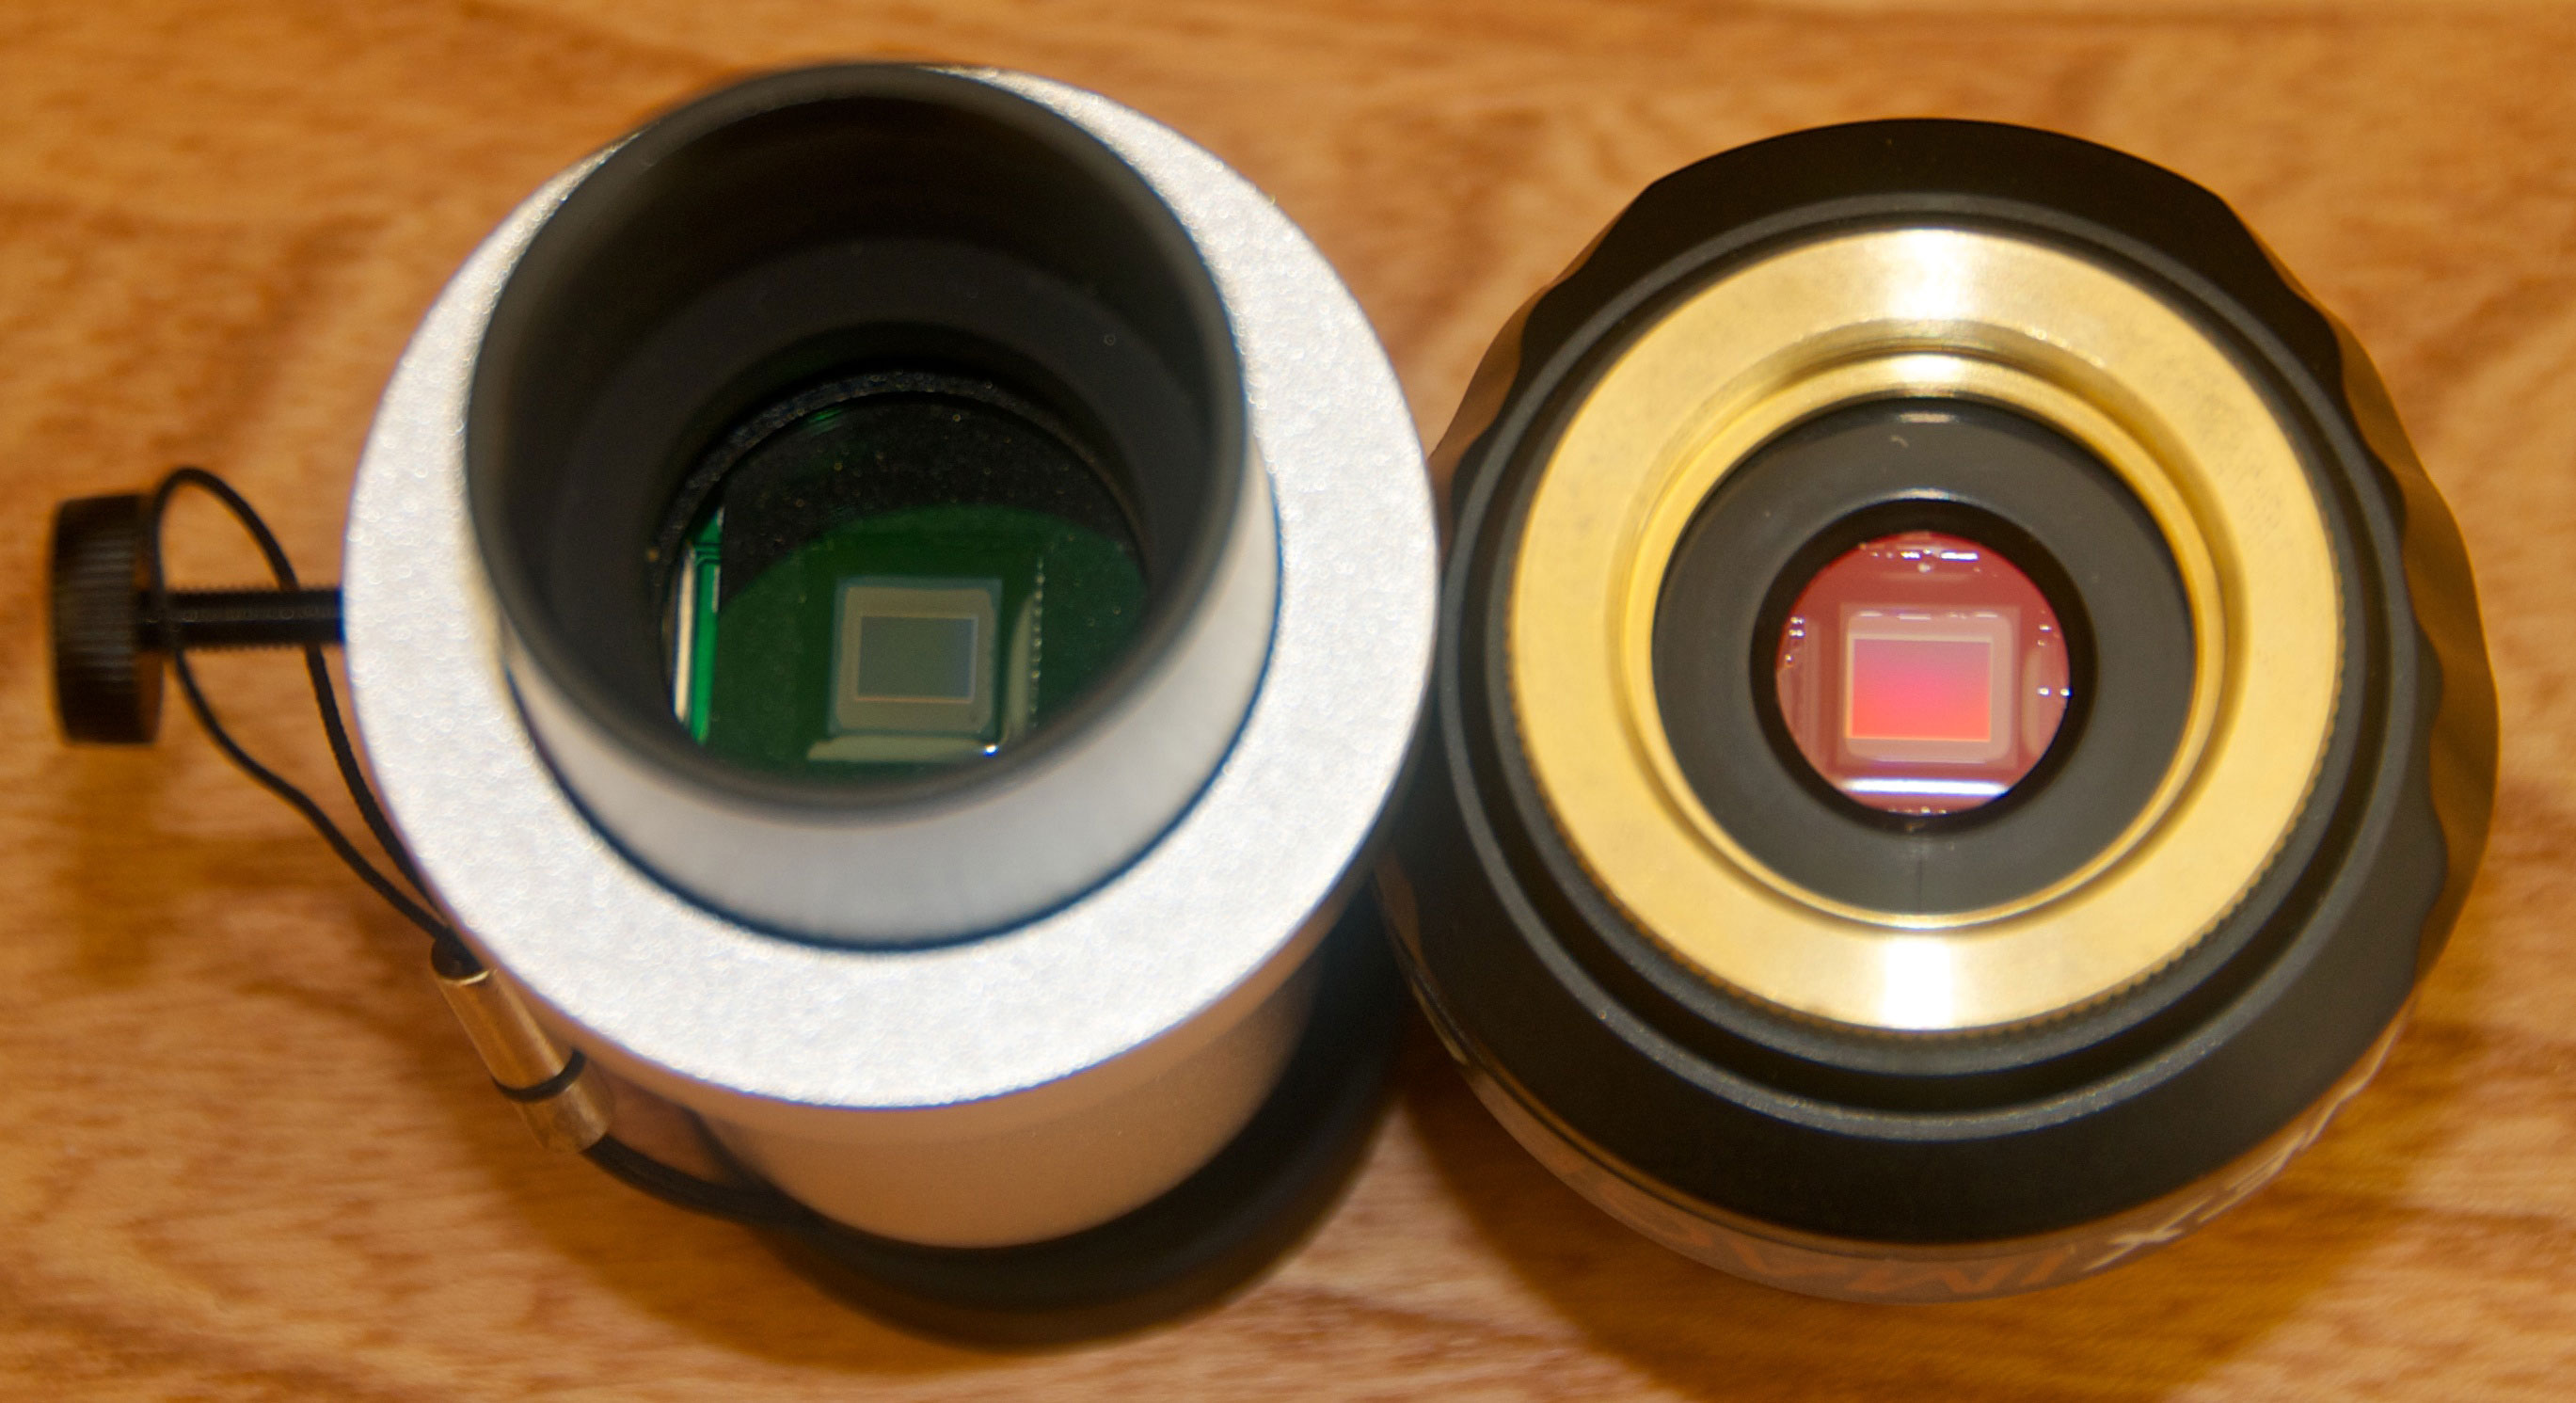 Comparison of the 1.2MP QHY5L-II and 5MP NexImage sensors. Credit: Mike Barrett